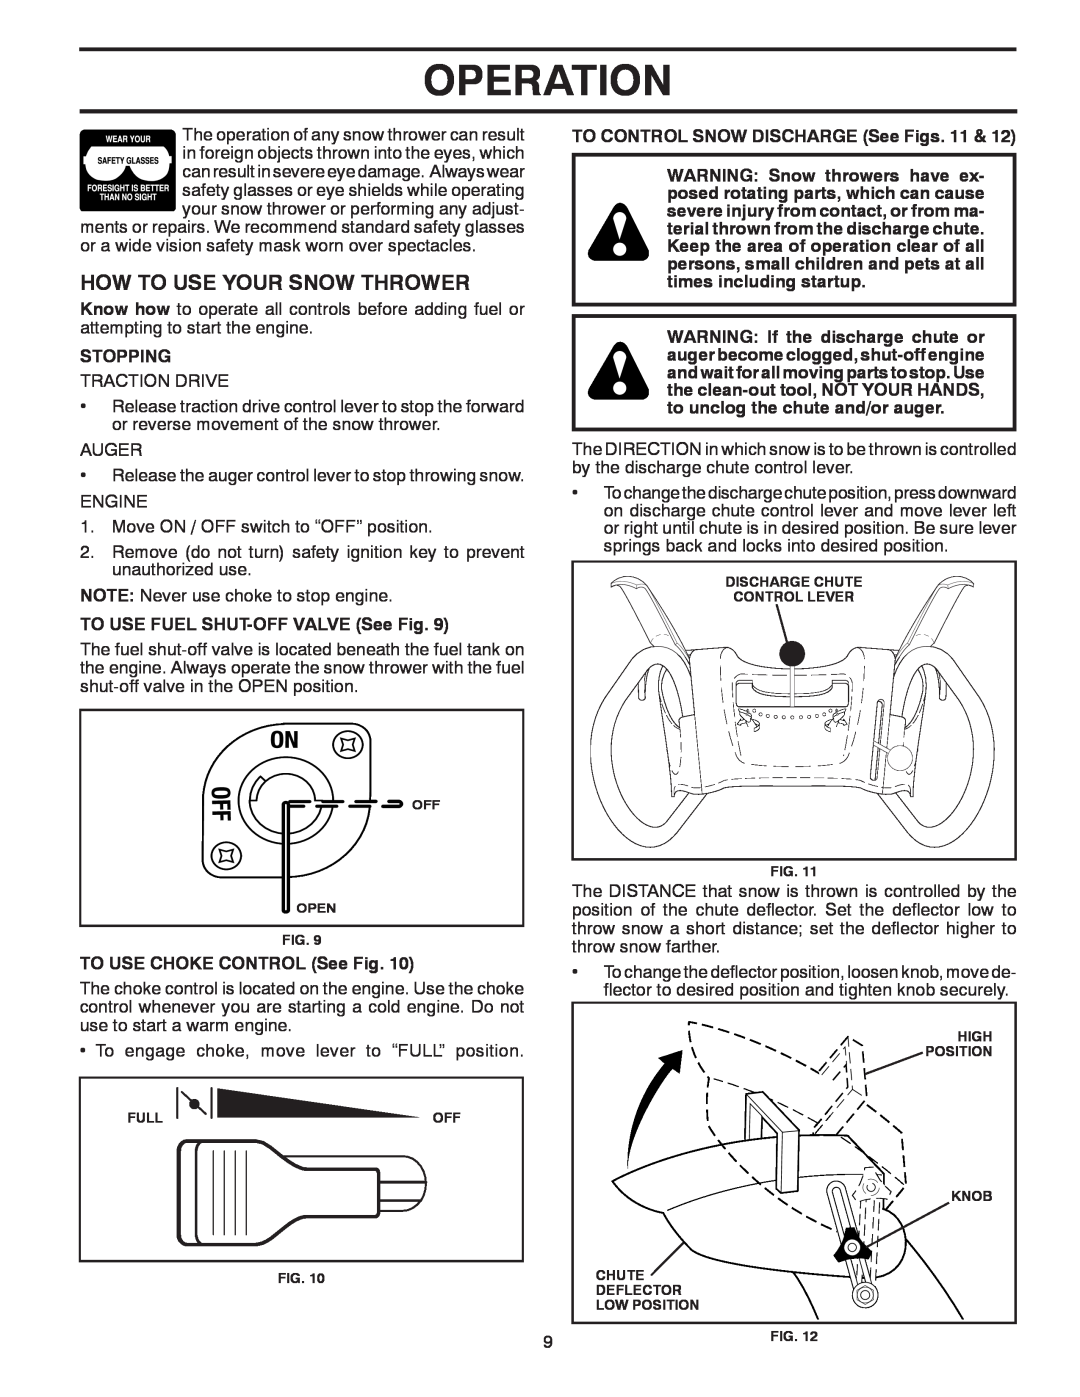 Poulan 96192003700, 435356 owner manual How To Use Your Snow Thrower, Operation, Stopping, TO USE FUEL SHUT-OFFVALVE See Fig 